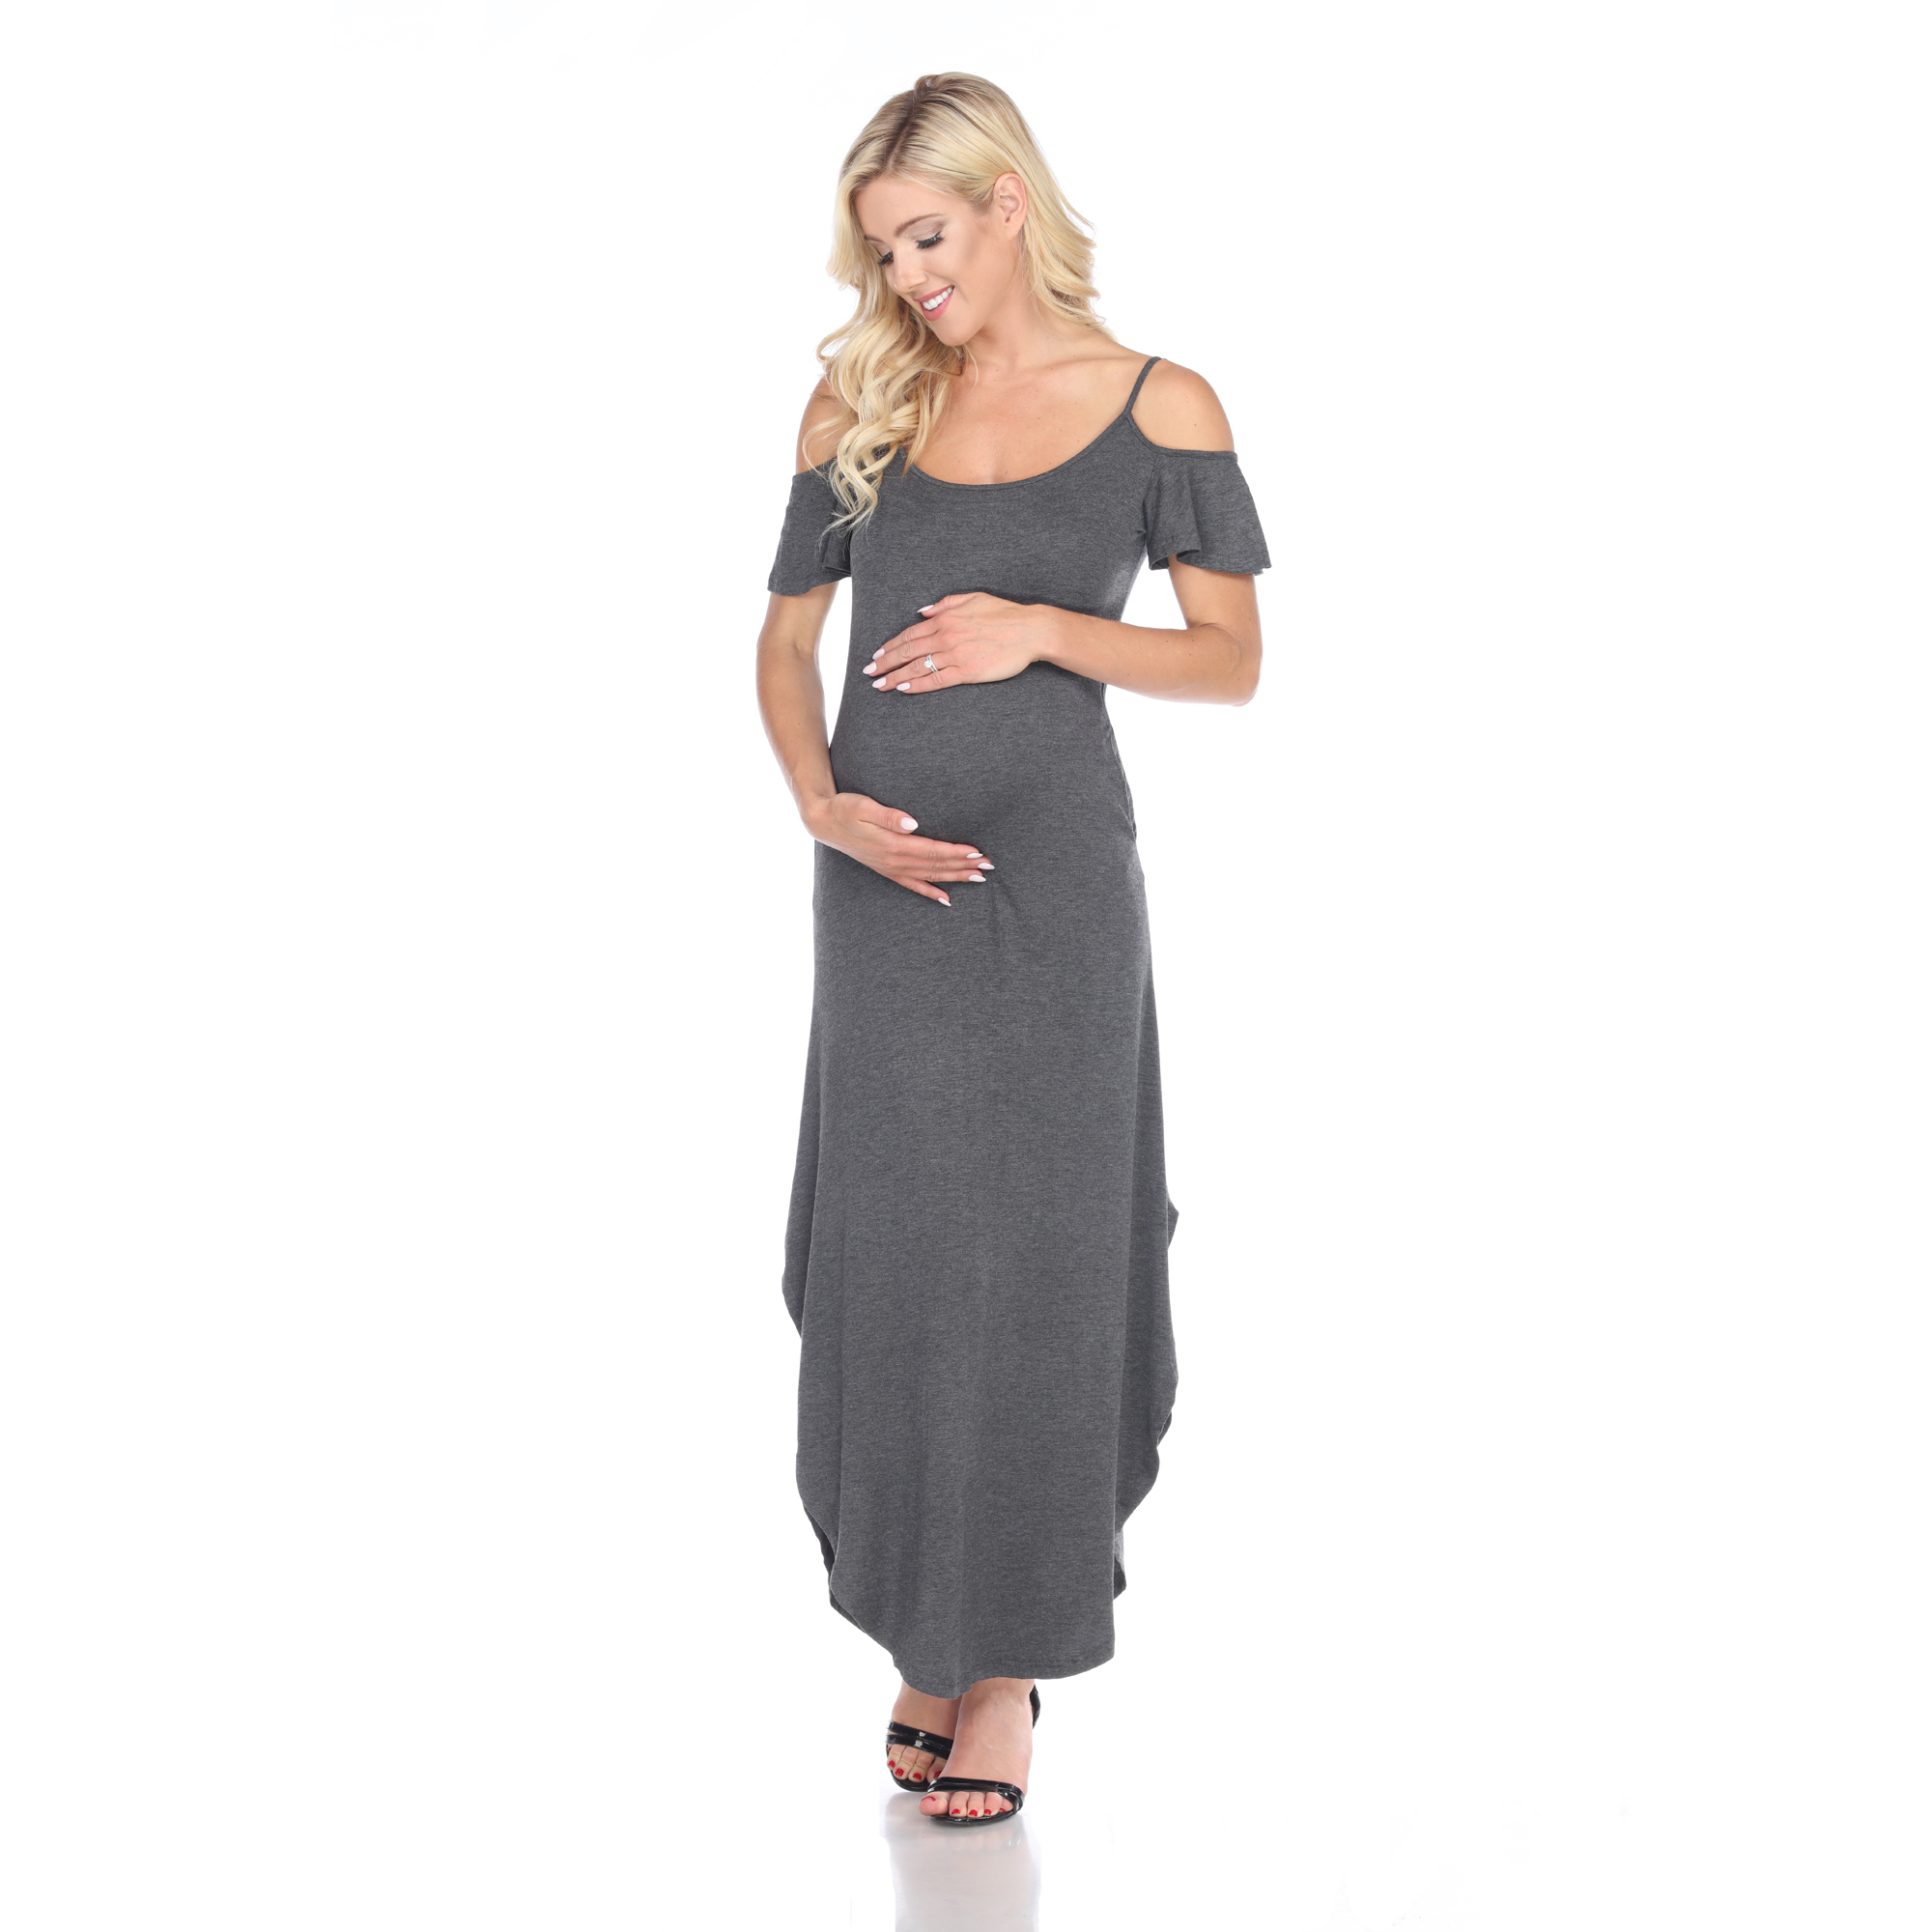 White Mark Women's Maternity Cold Shoulder Maxi Dress - Charcoal, 2X